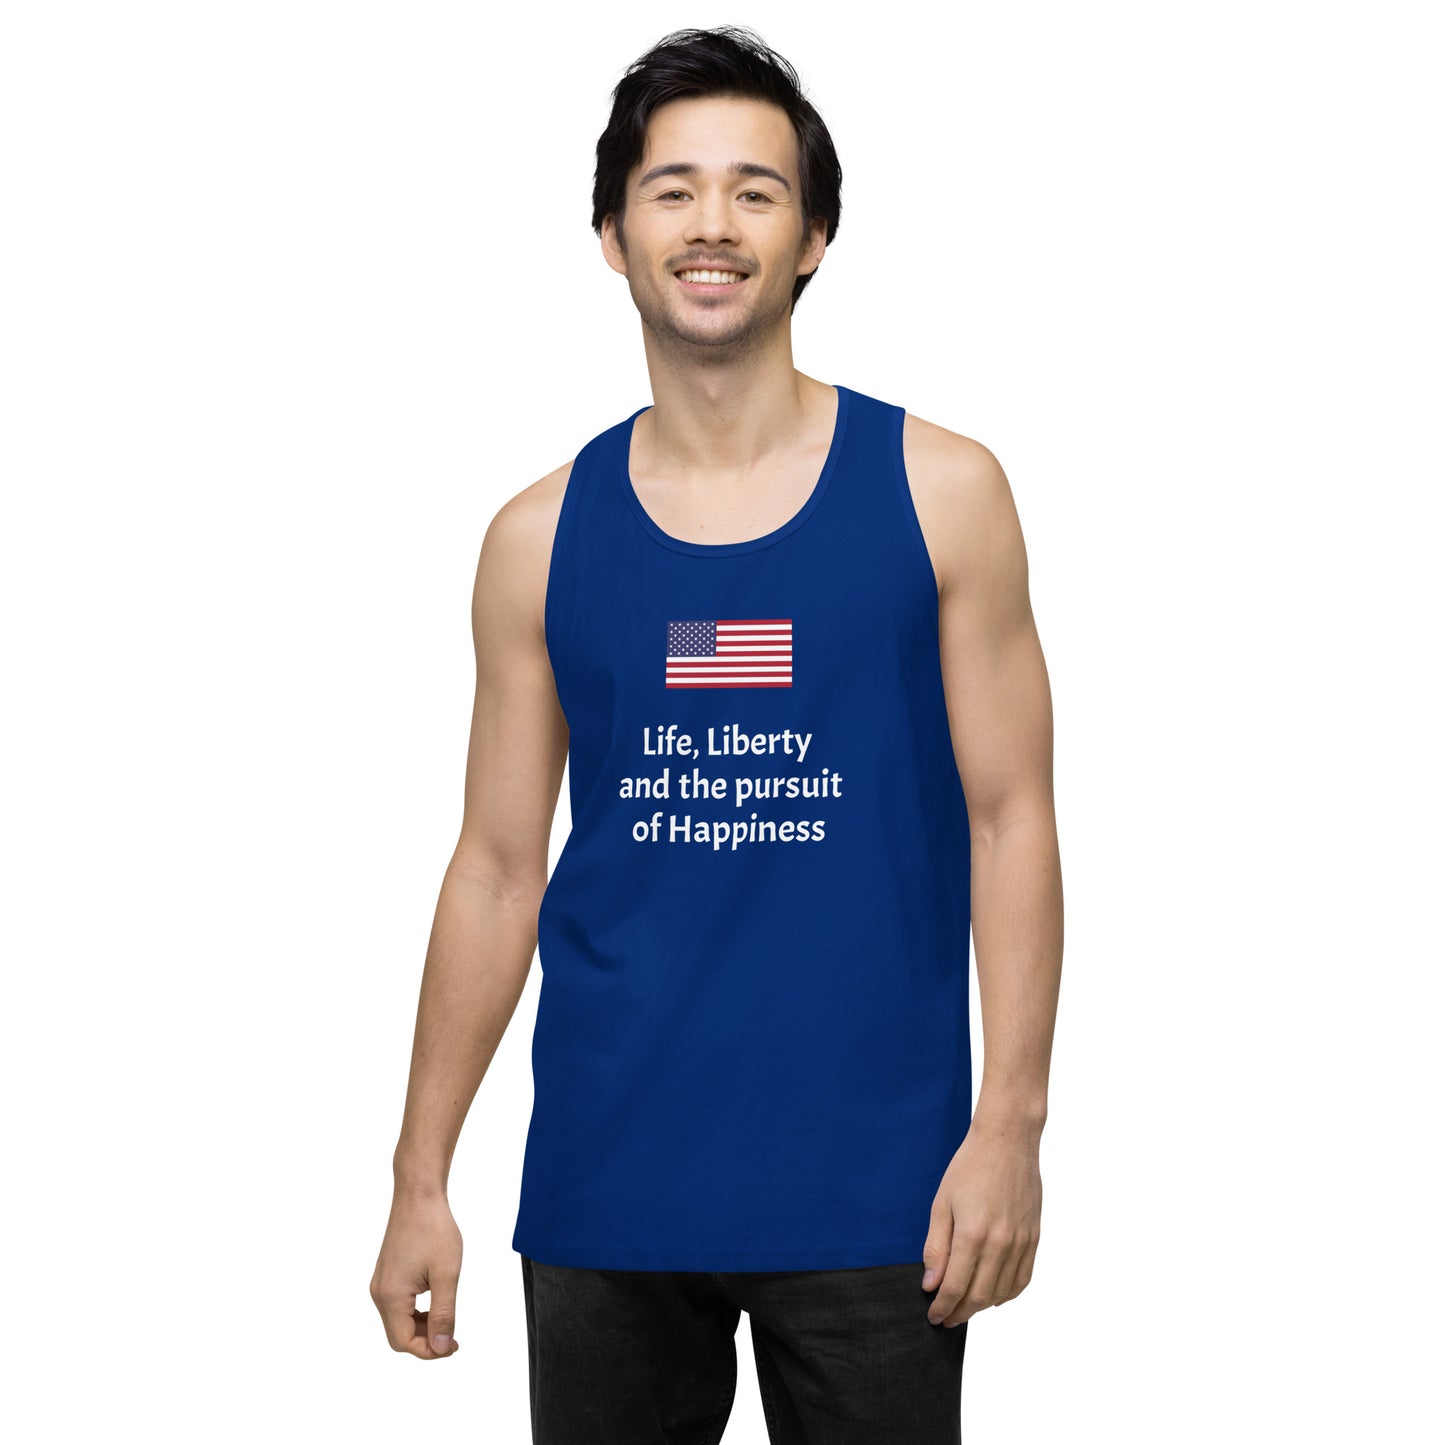 Life, Liberty and the pursuit of Happiness men’s premium tank top